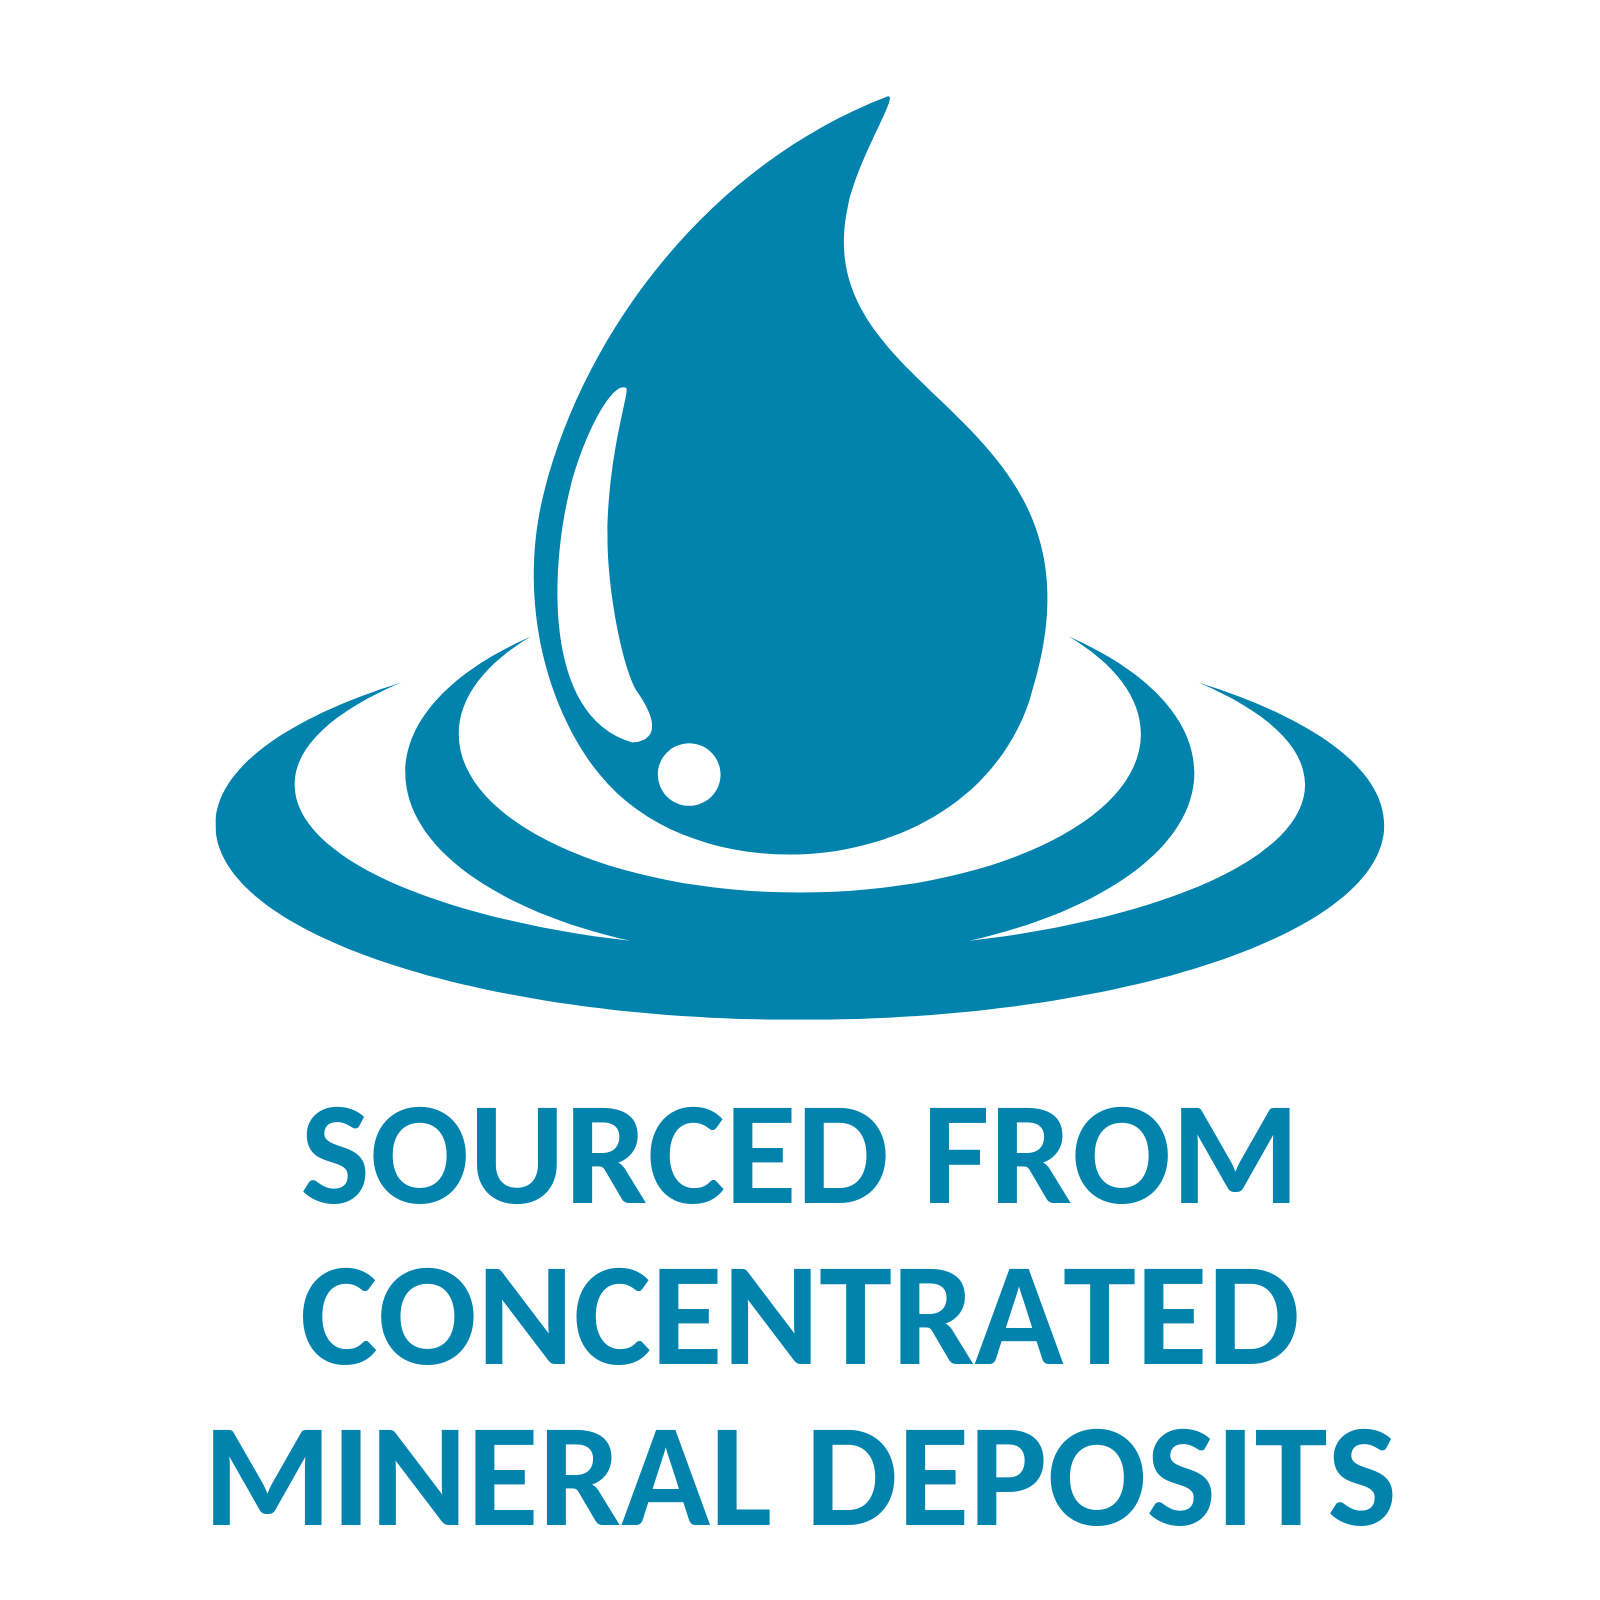 Trace Minerals as sourced from concentrated mineral deposits